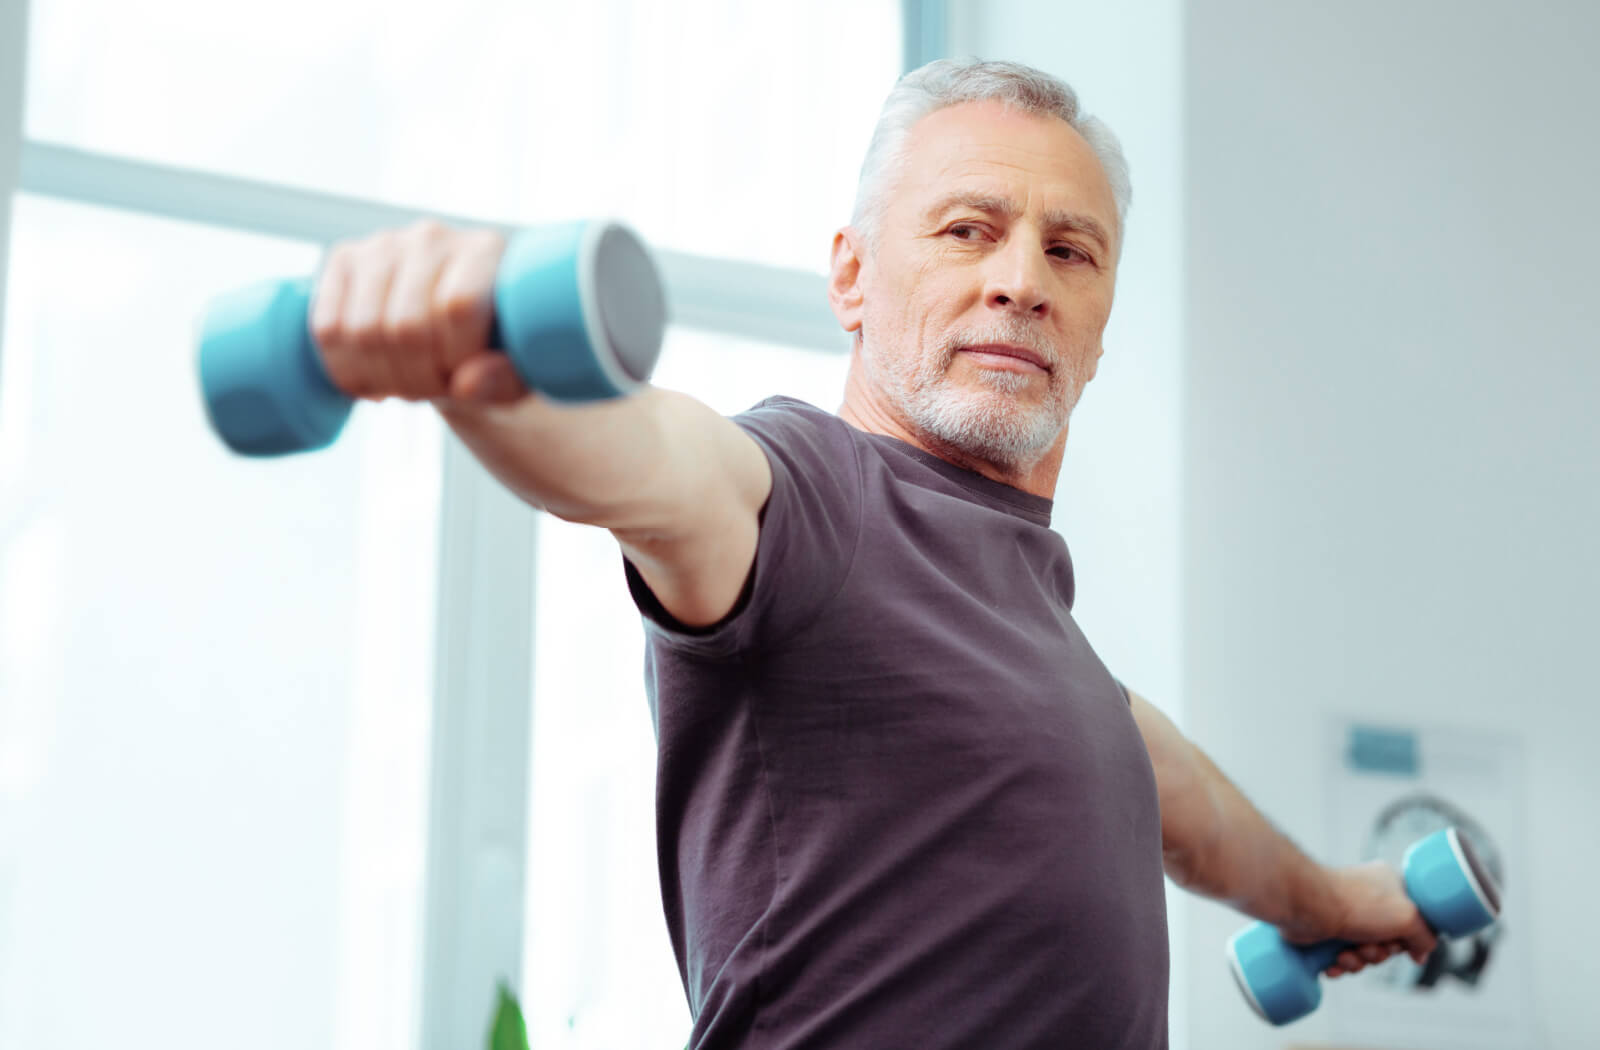 A senior man holding his arms out to his sides with a small dumbbell in each hand.